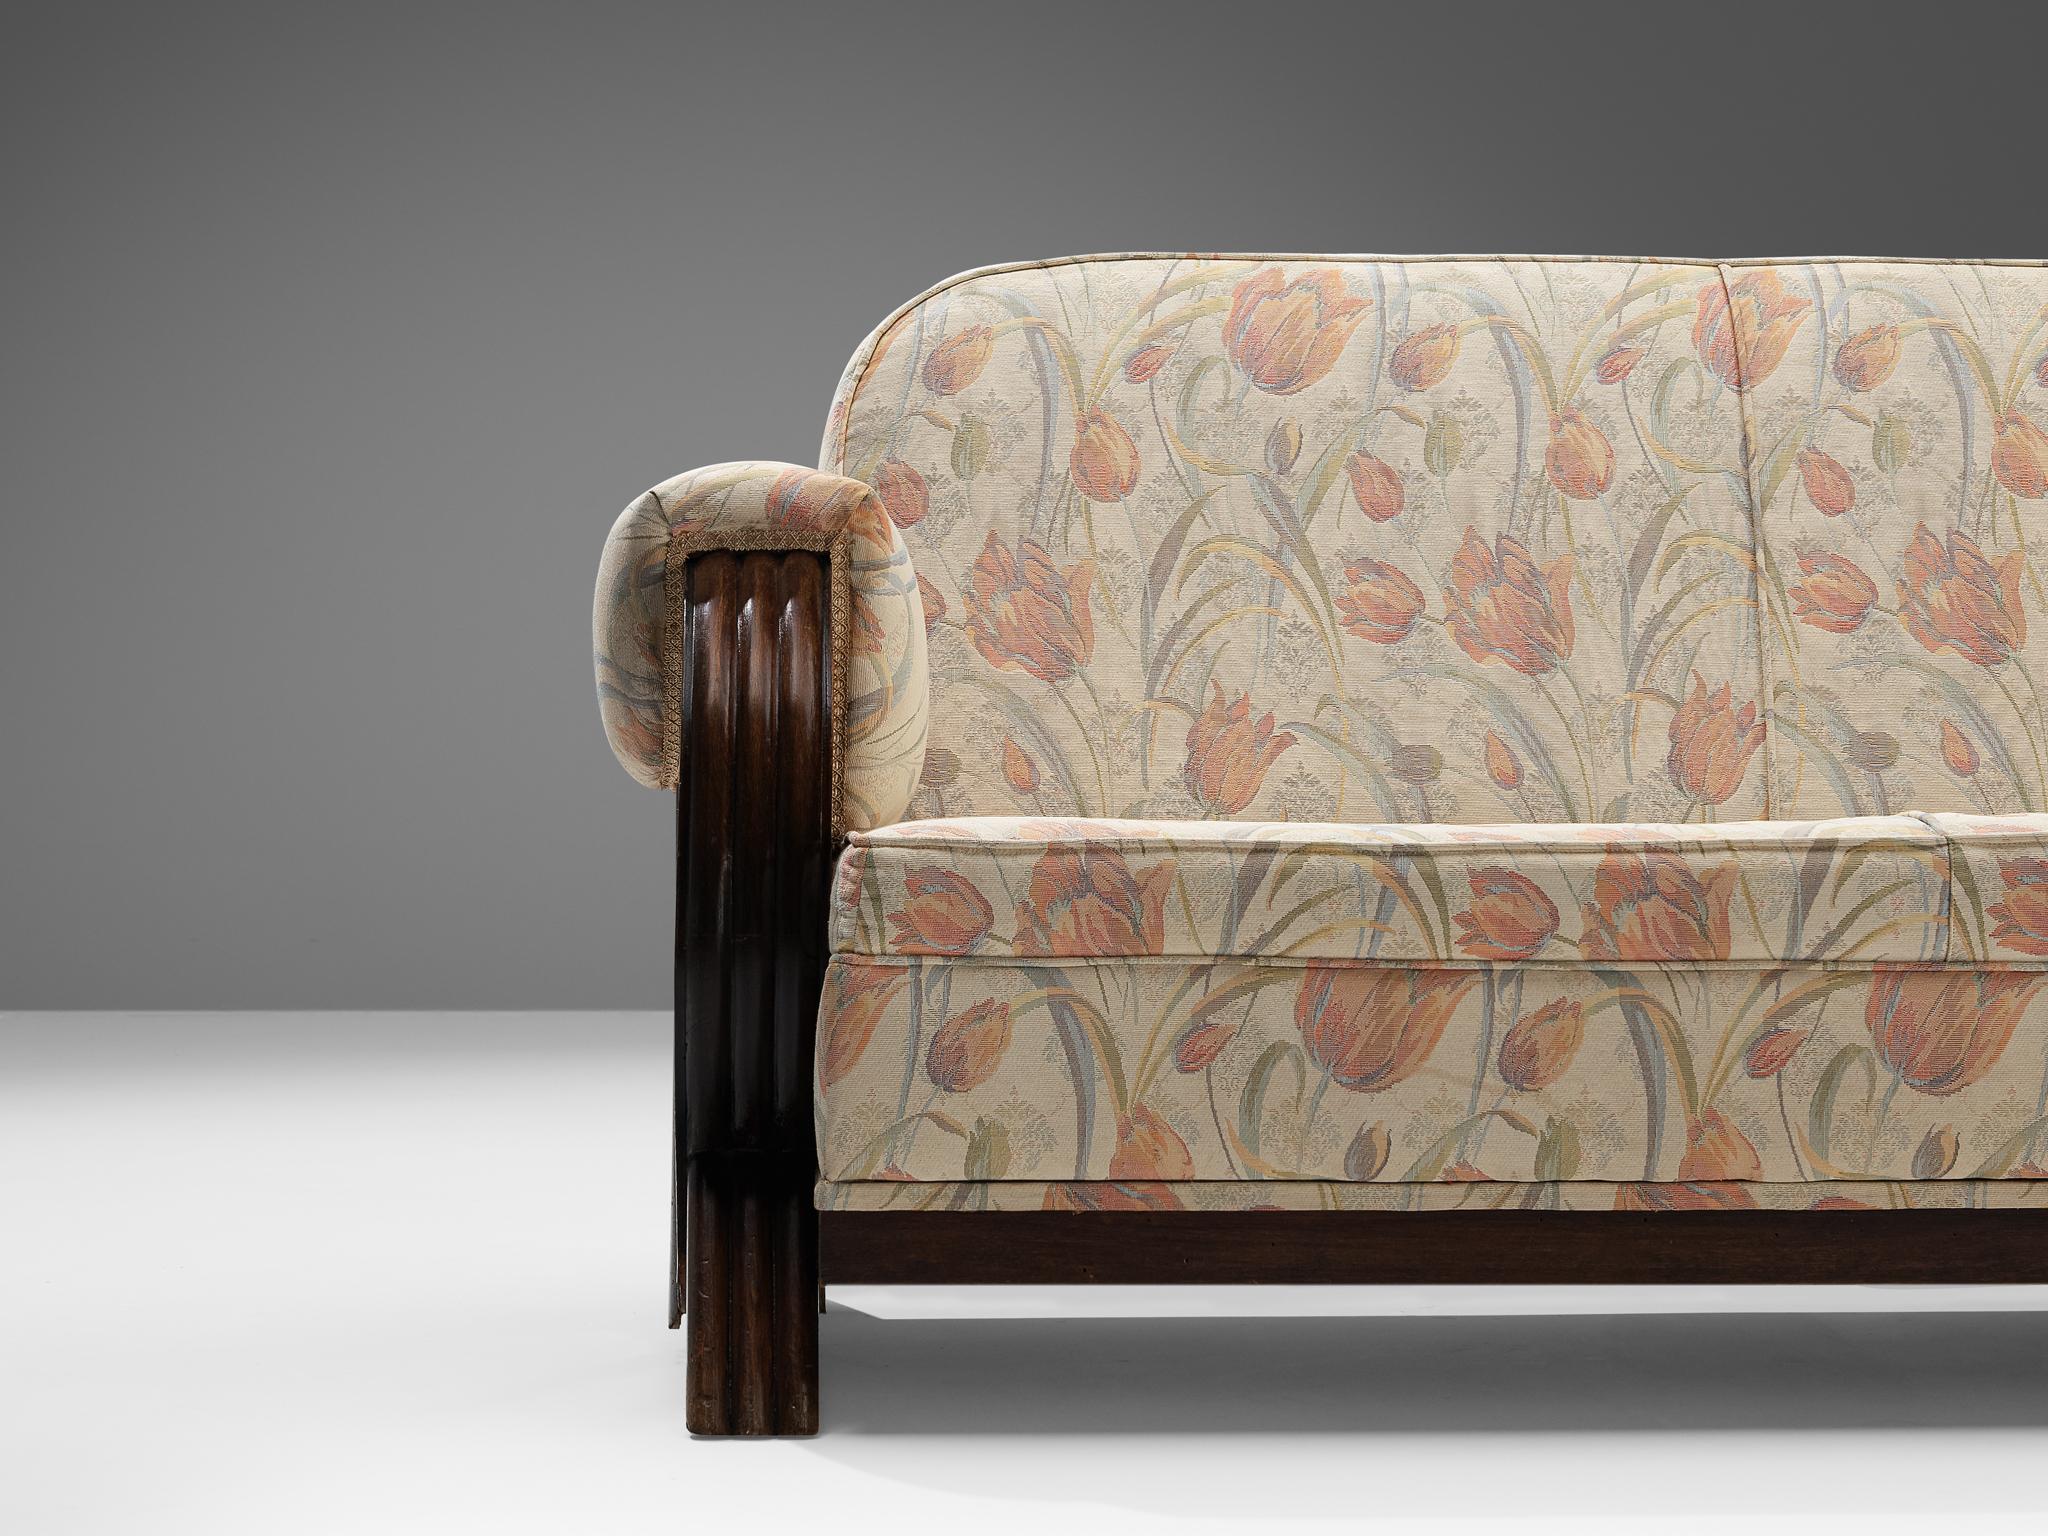 Mid-20th Century Italian Art Deco Sofa in Floral Upholstery and Wood For Sale